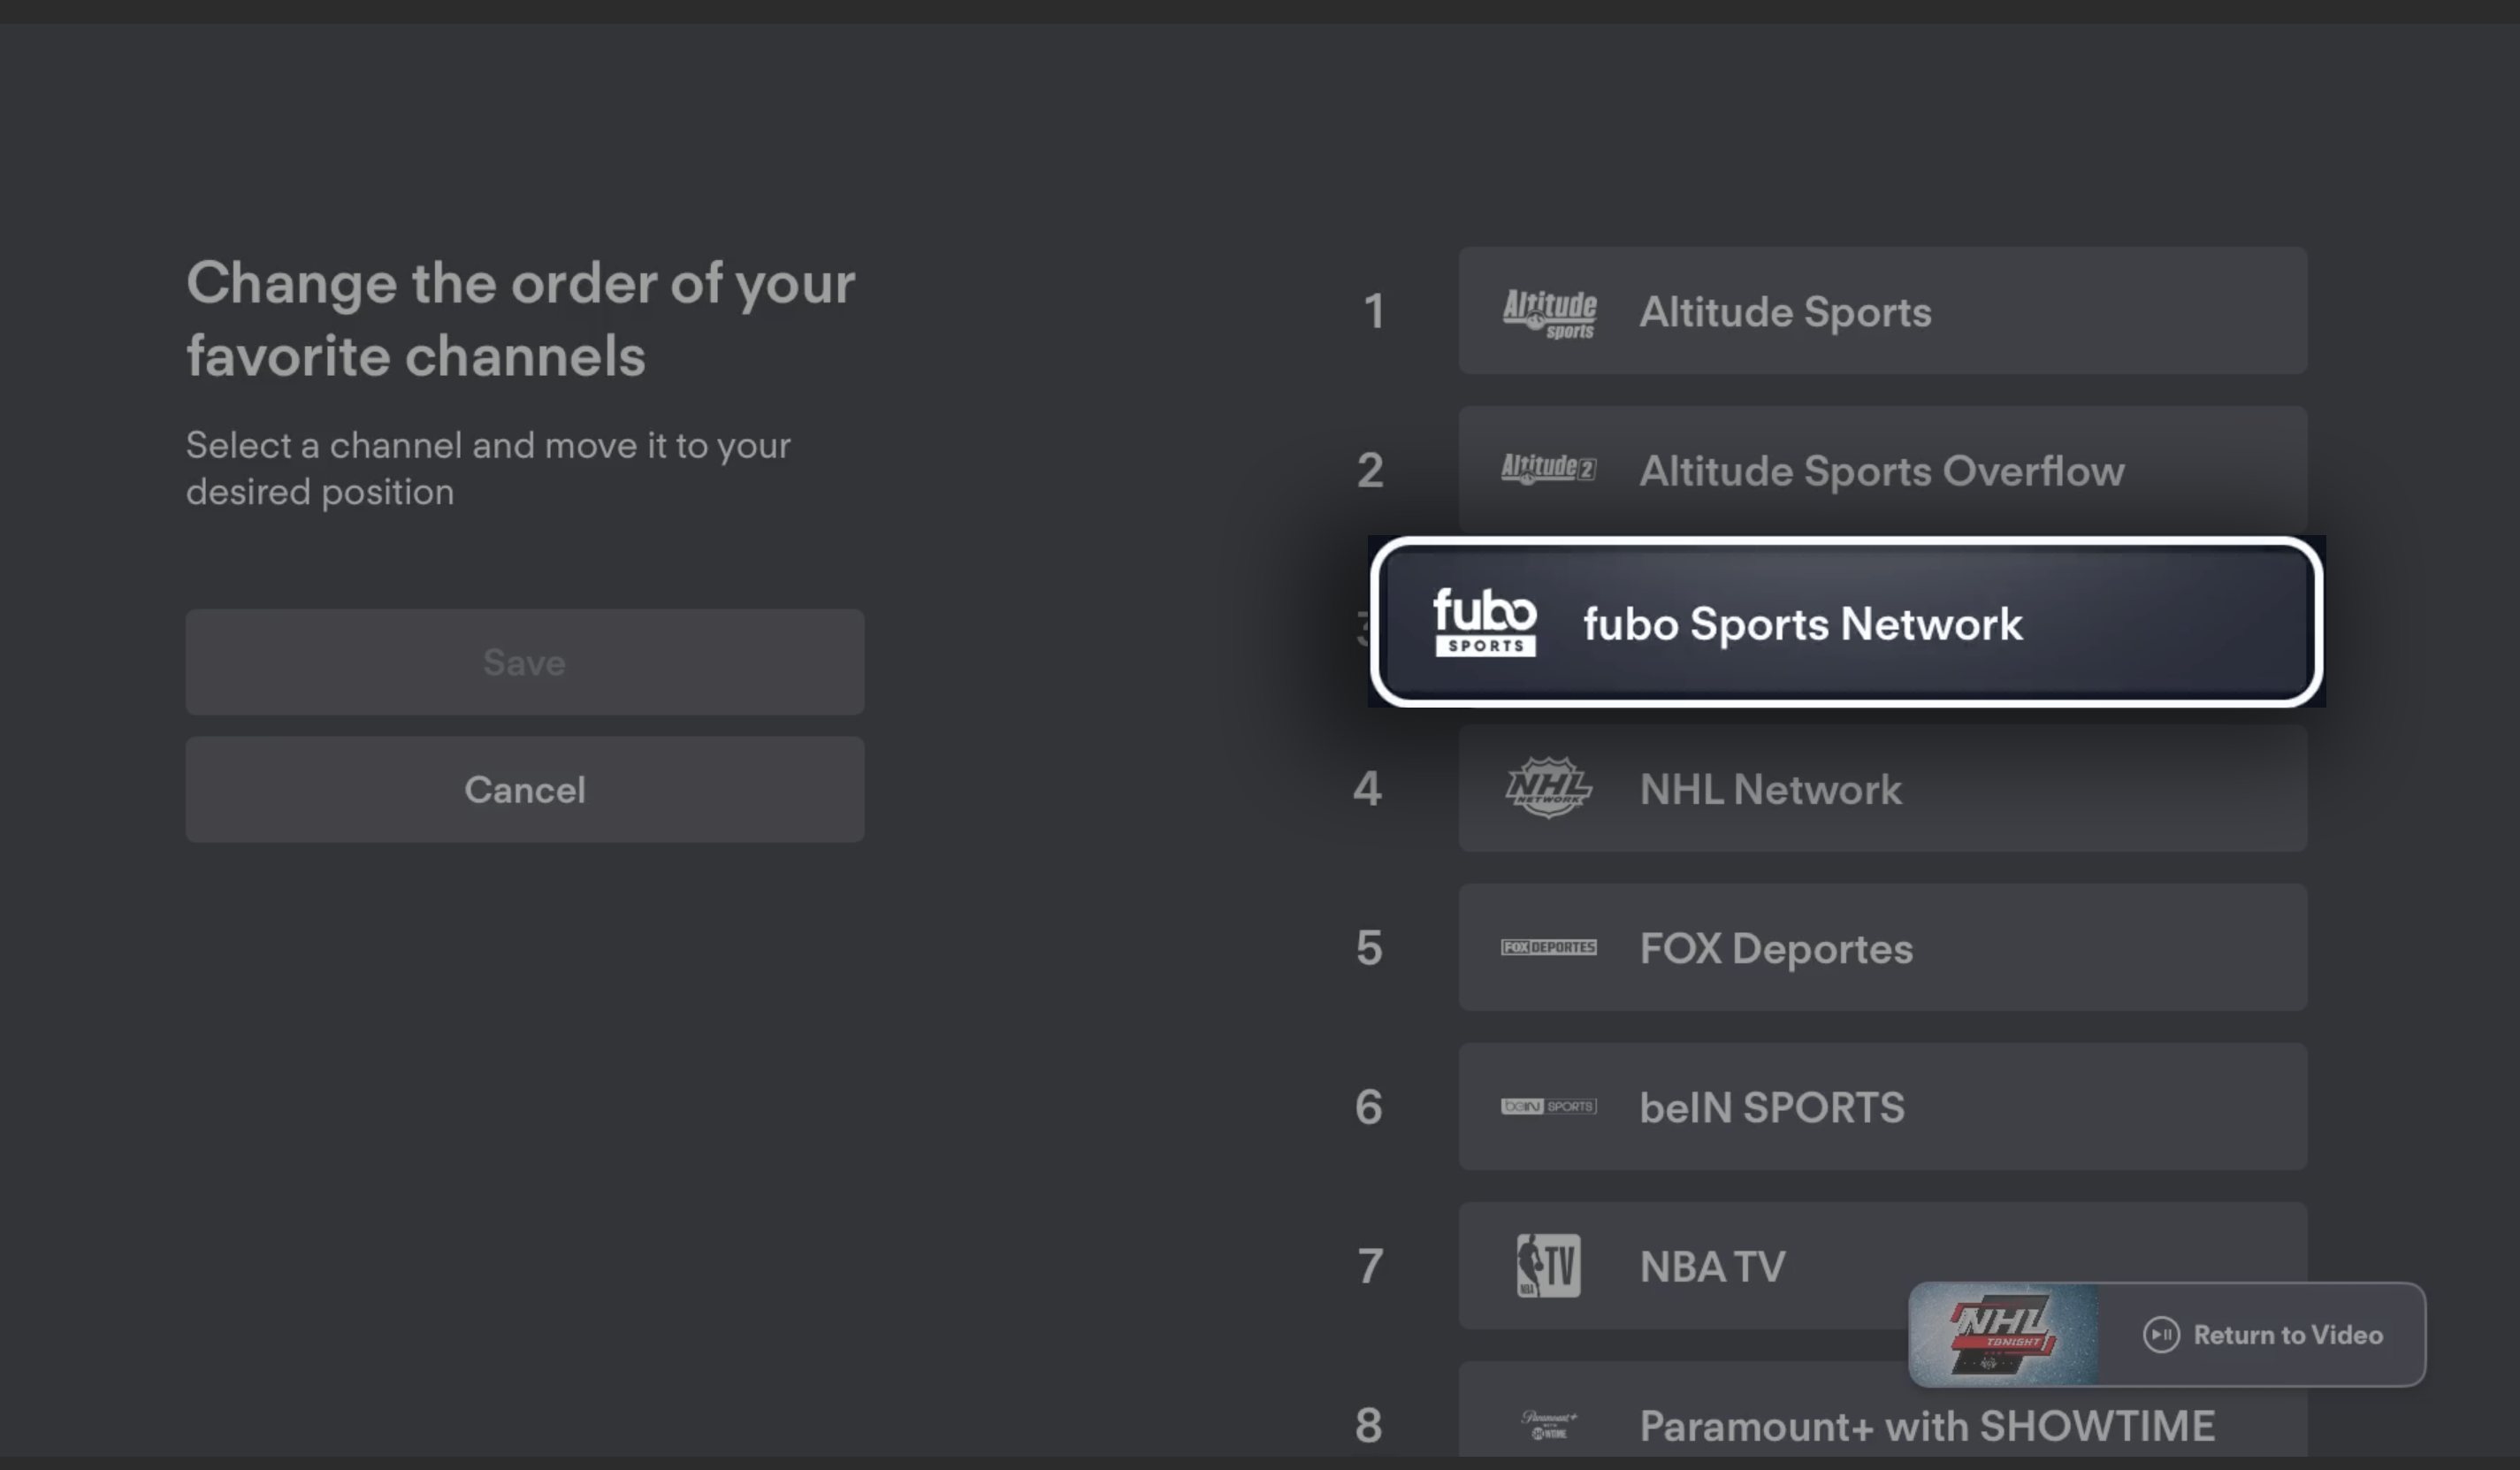 GUIDE screen of the FuboTV app on Apple TV with remote control overlay; swiping up or down on the touchpad to move a favorited channel